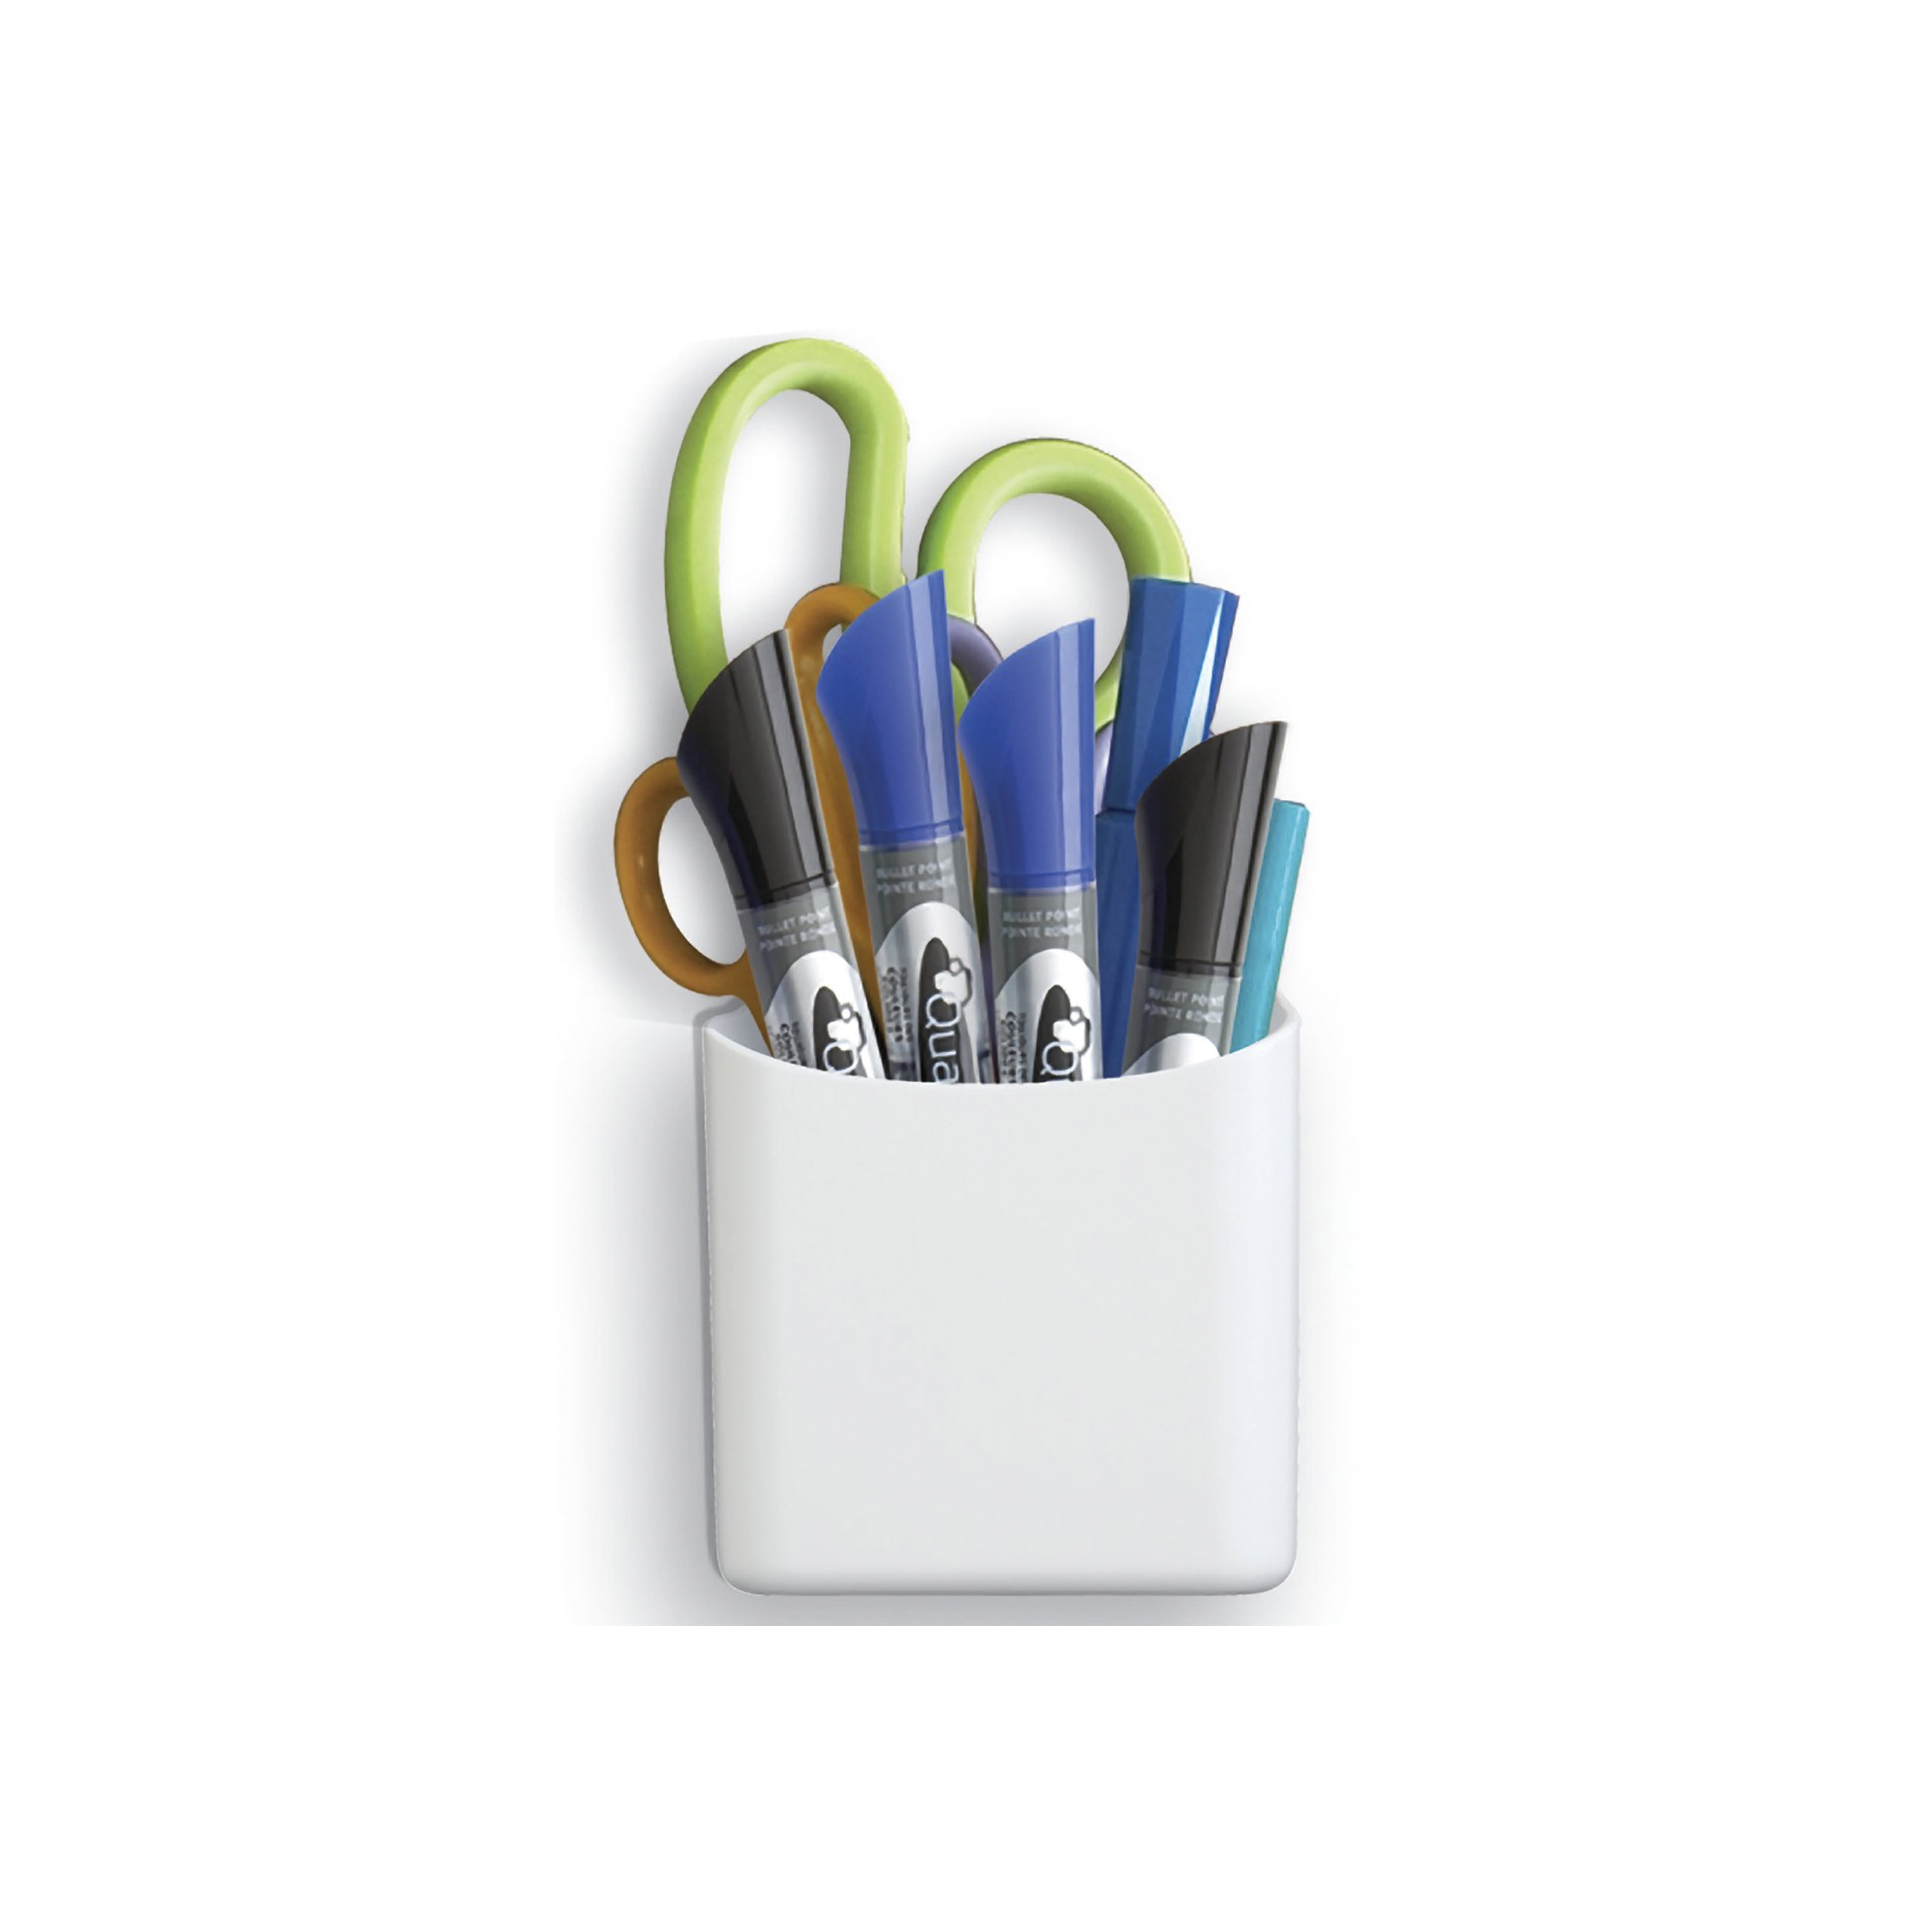 PU Magnetic Clipboard w/Pen Holder - AMP01 - IdeaStage Promotional Products